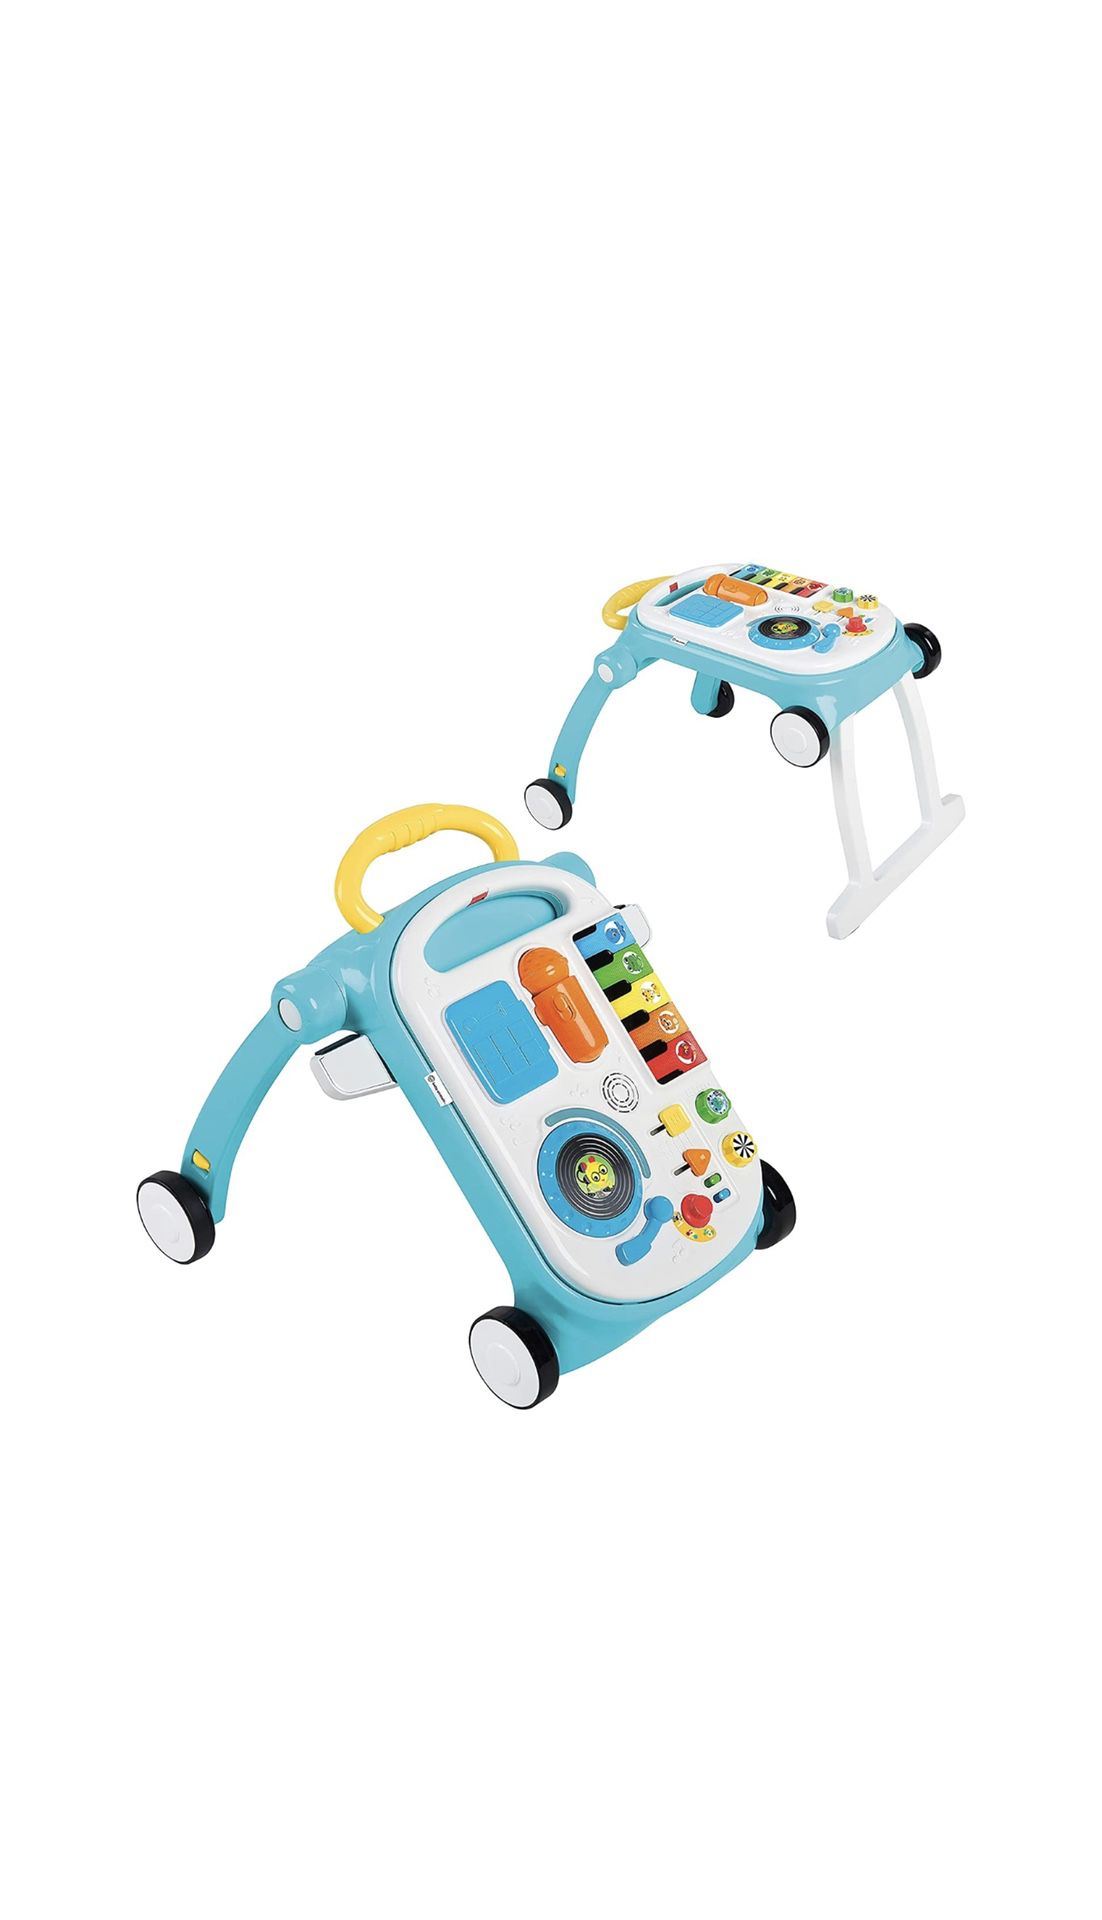 Baby Einstein Musical Mix ‘N Roll 4-in-1 Push Walker, Activity Center, Toddler Table and Floor Toy for 6 Months+, Blue